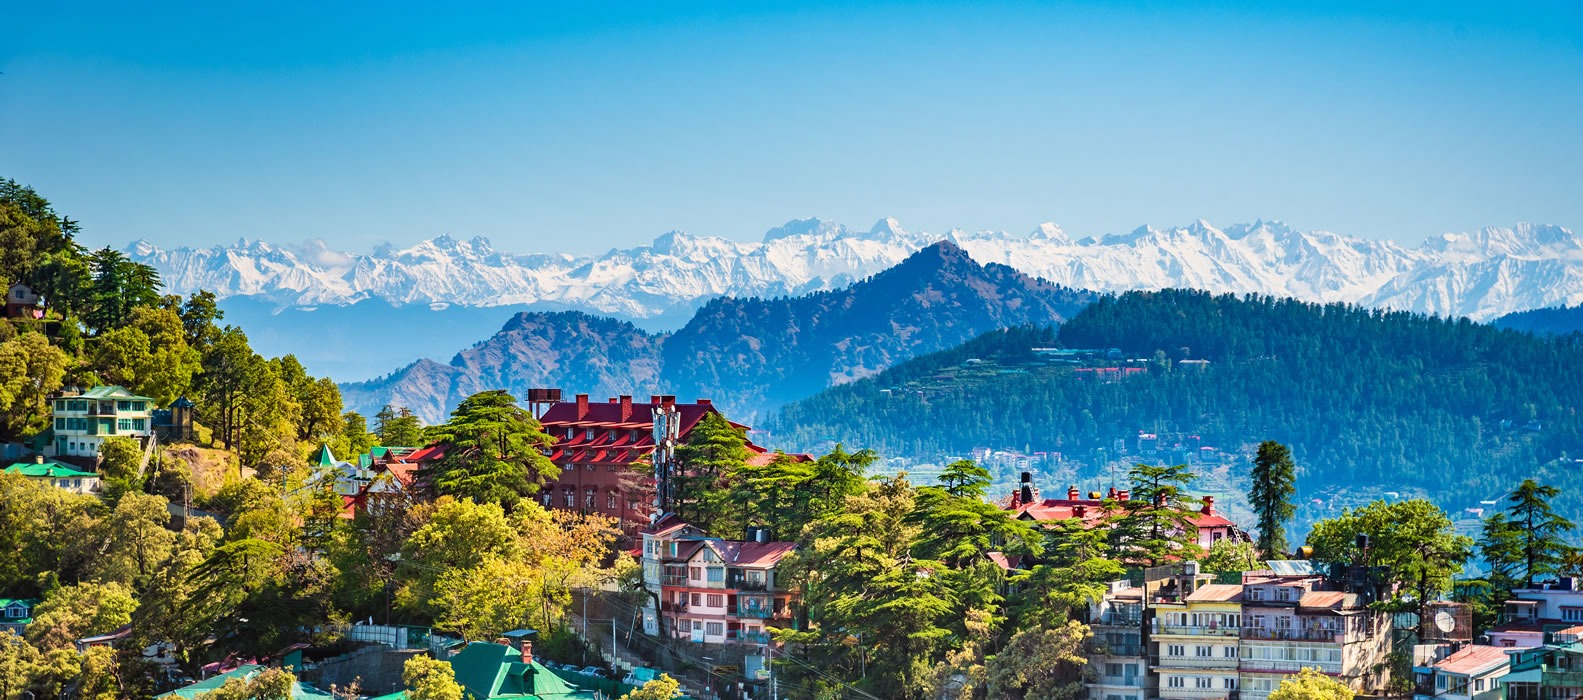 Shimla Honeymoon Packages - Affordable Package for Couples